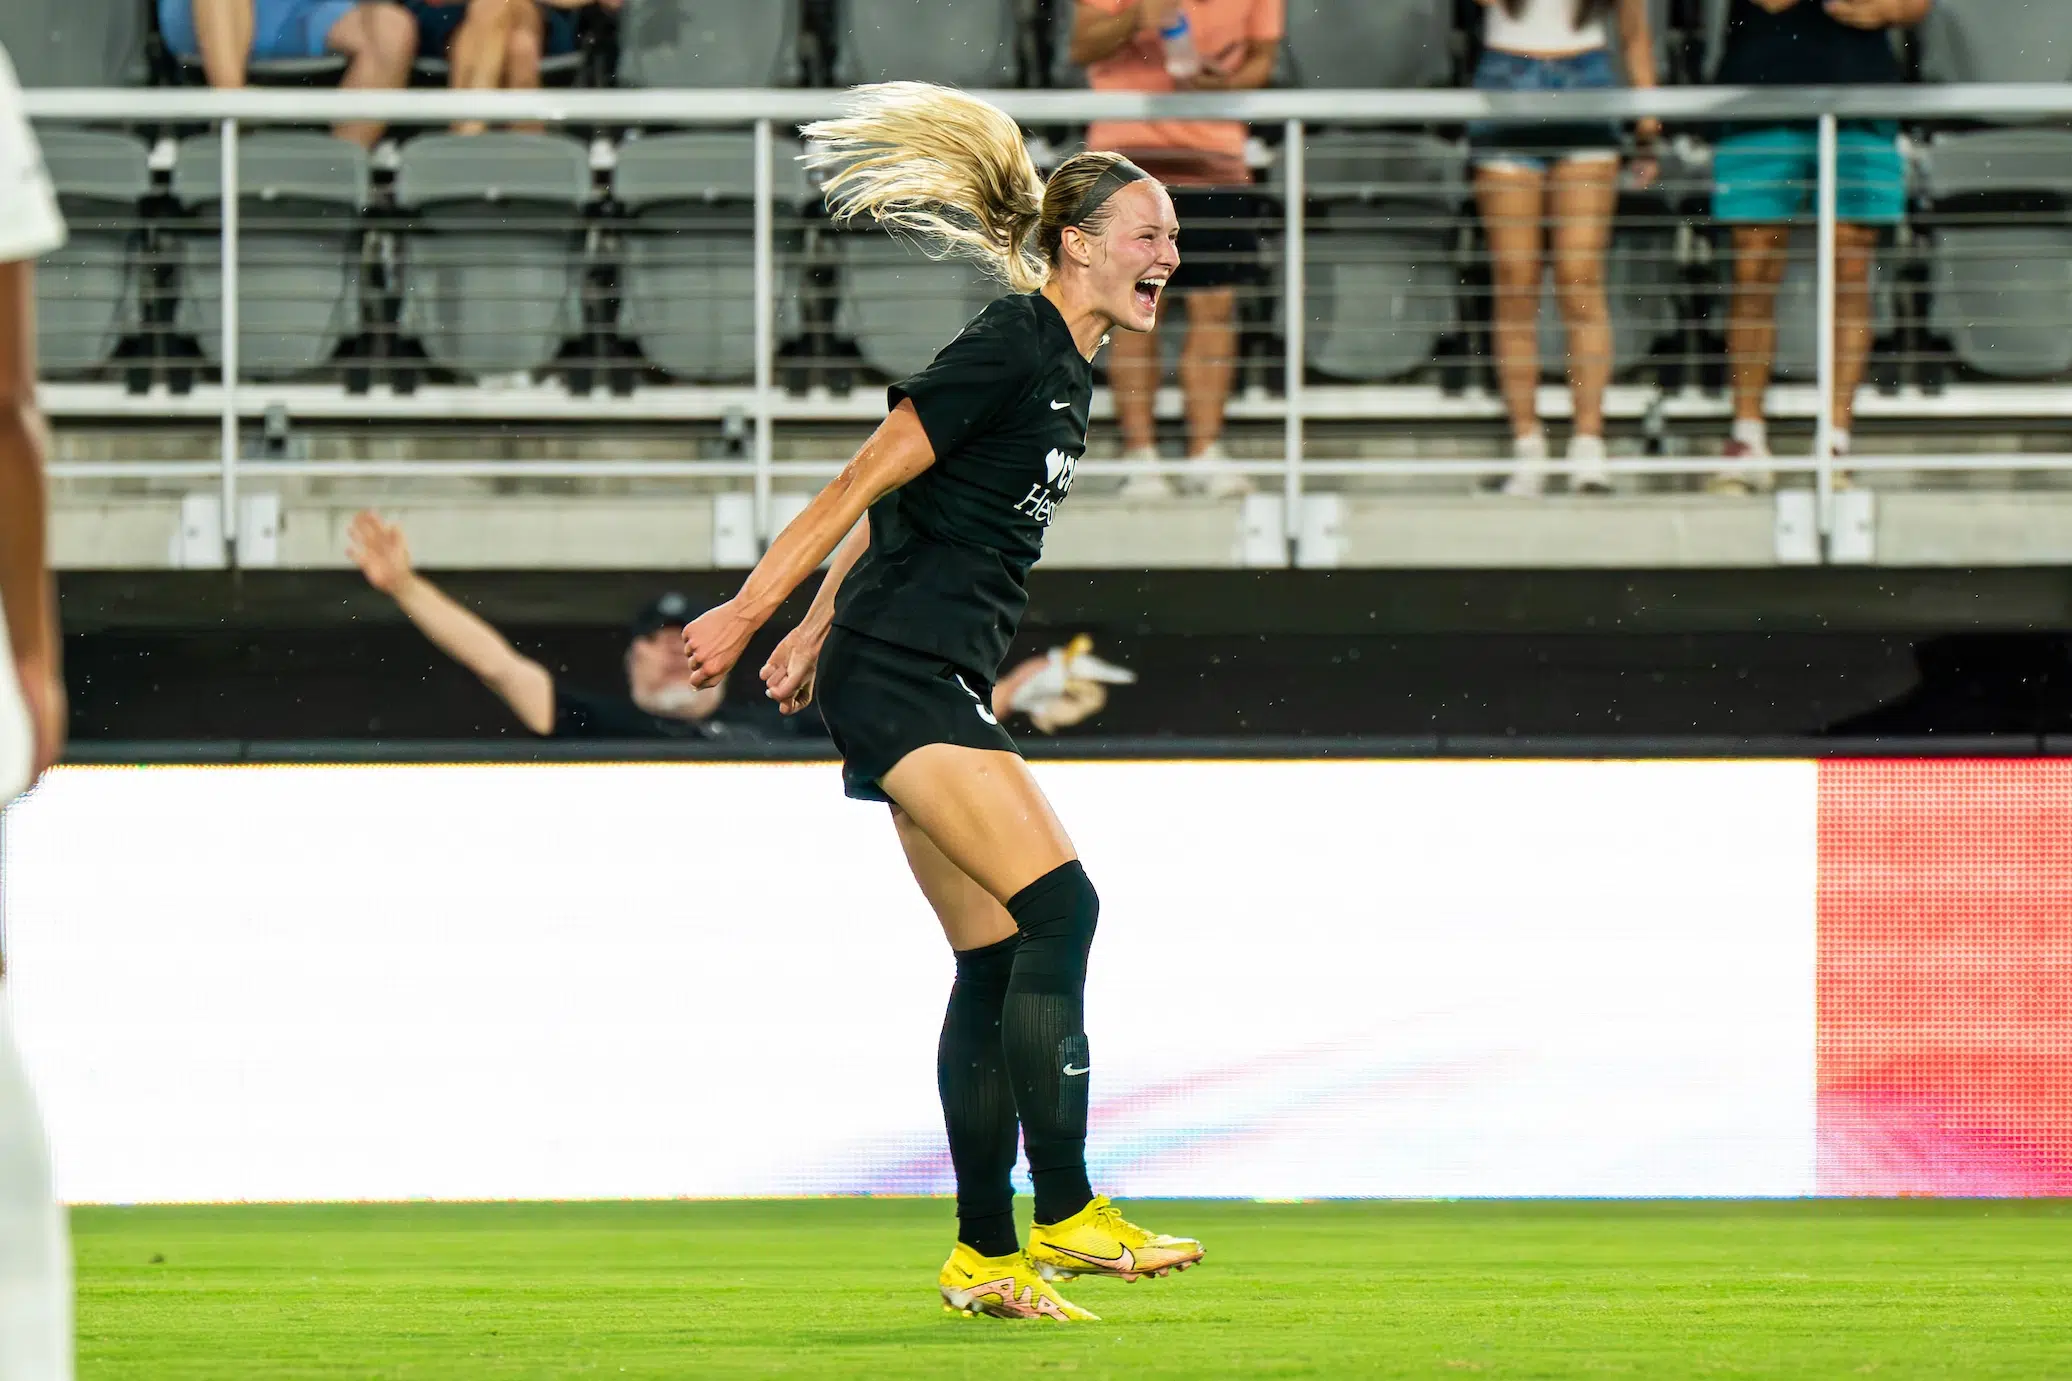 A soccer player in a black uniform jumps up as her blonde ponytail flies in the air. She has a big smile on her face and is wearing yellow cleats.